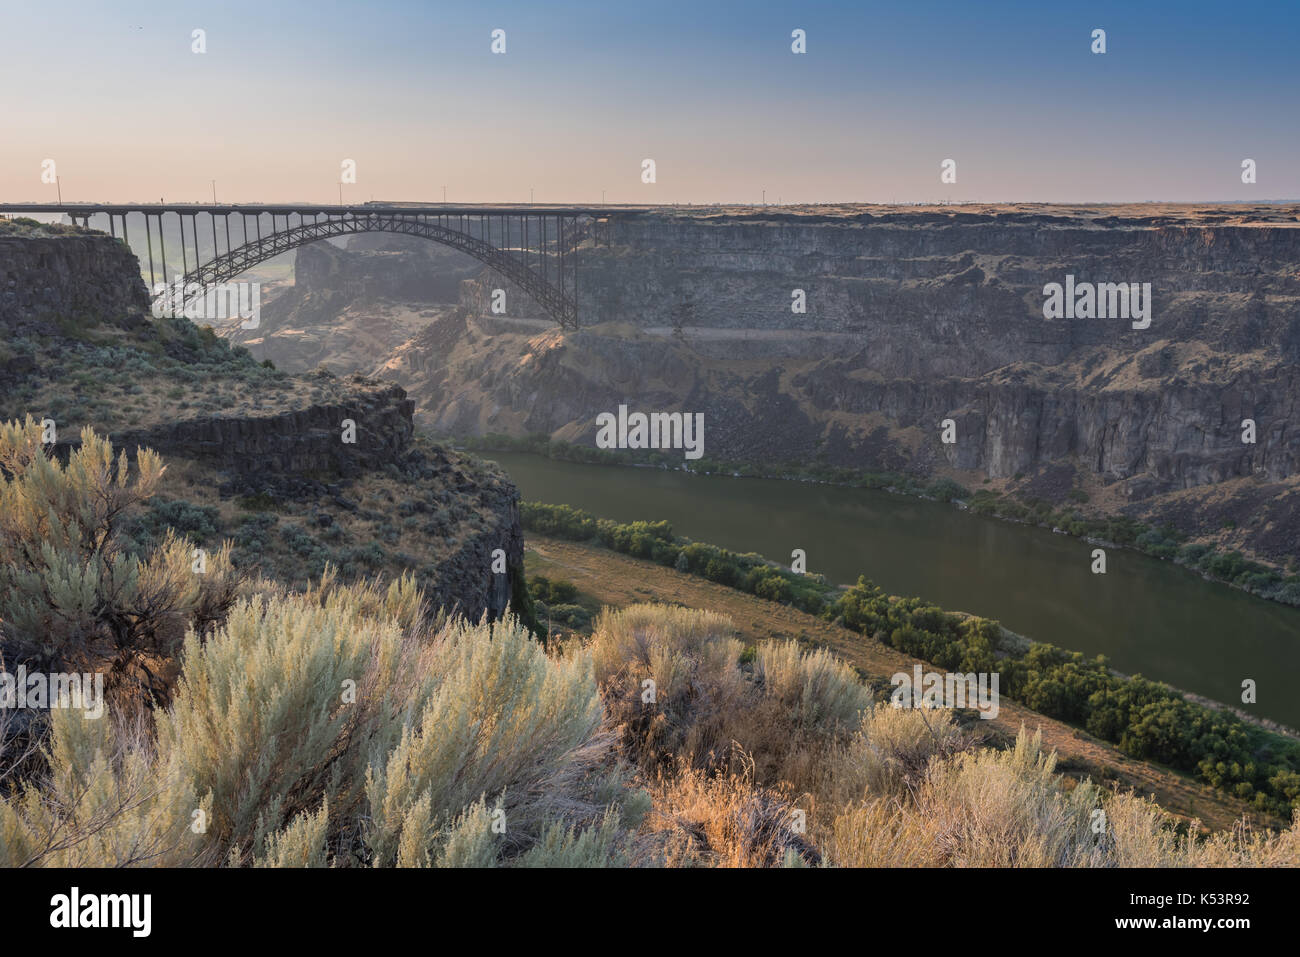 Perrine Bridge Spans The Canyon Above The Snake River just before sunset Stock Photo